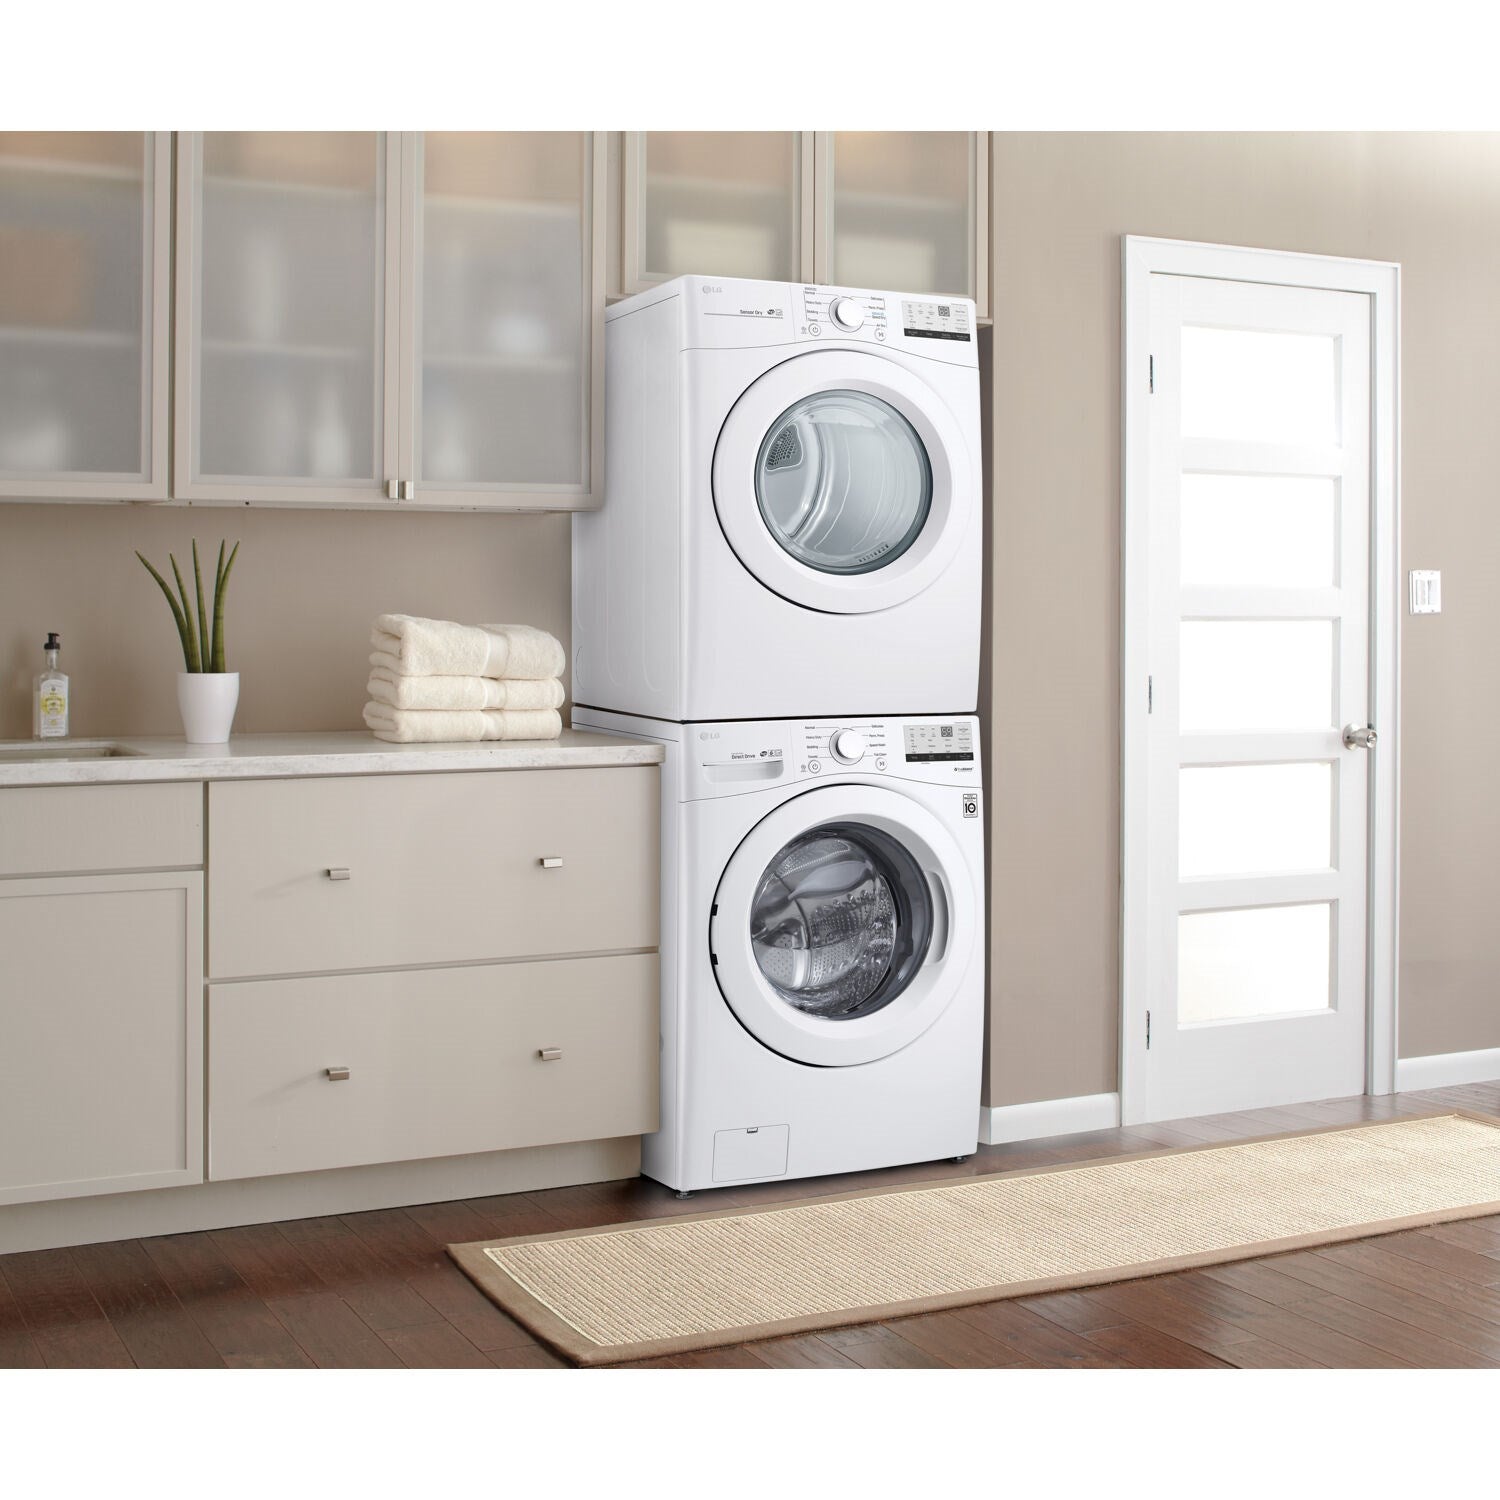 LG - 7.4 cu. ft. Ultra Large Capacity White Vented Smart Gas Dryer with Sensor Dry | DLG3401W